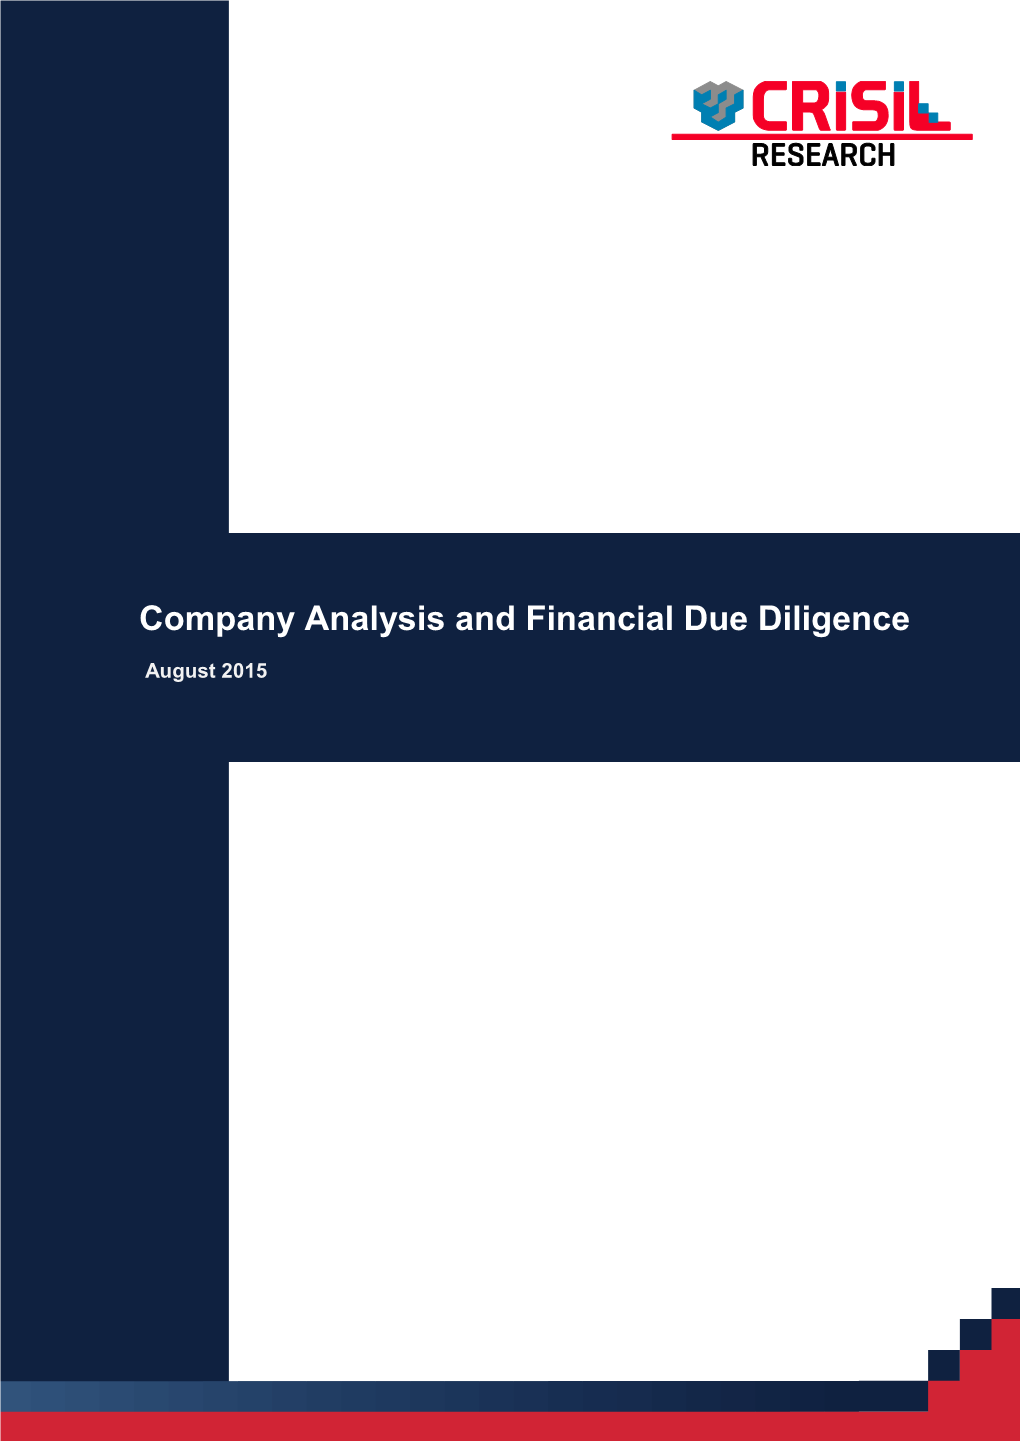 Company Analysis and Financial Due Diligence